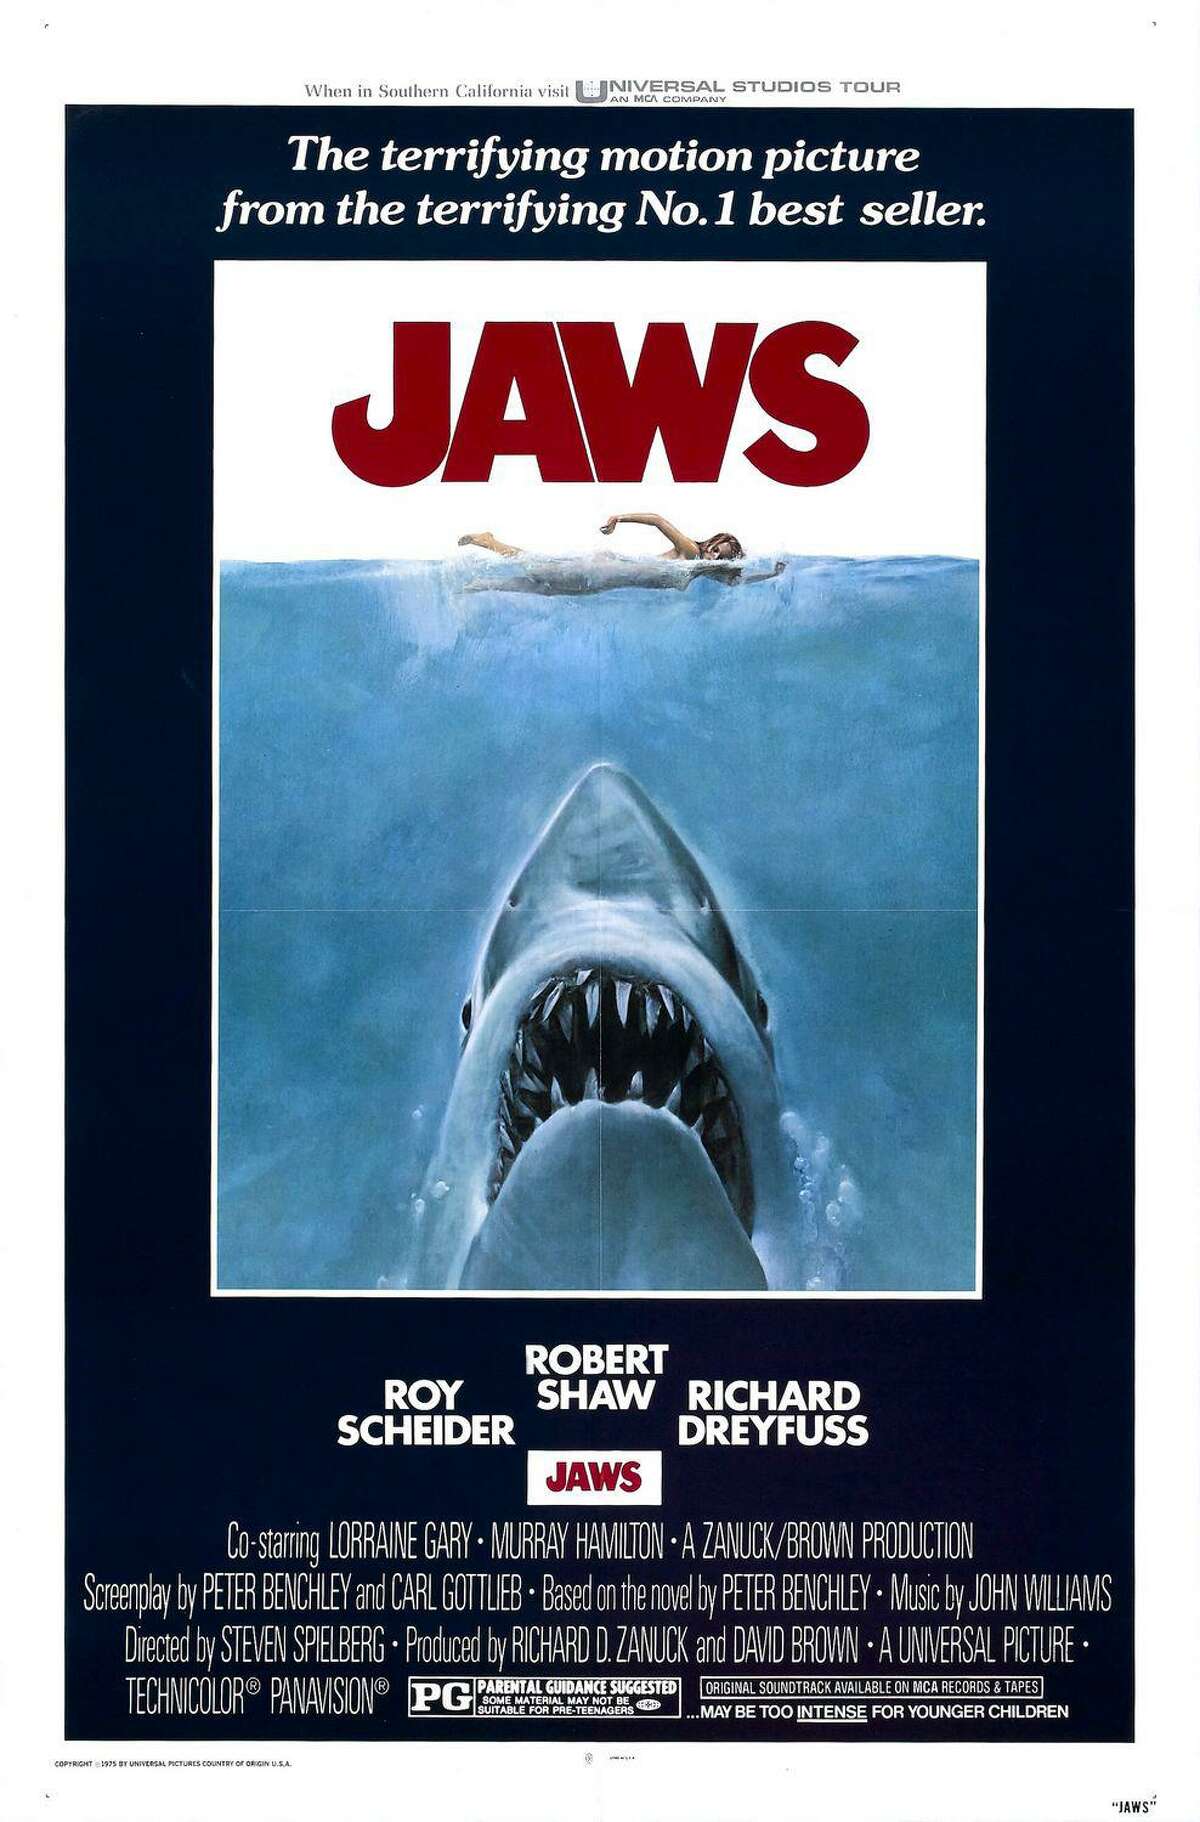 "Jaws" a magnificent summer frightener that only gets better with age.